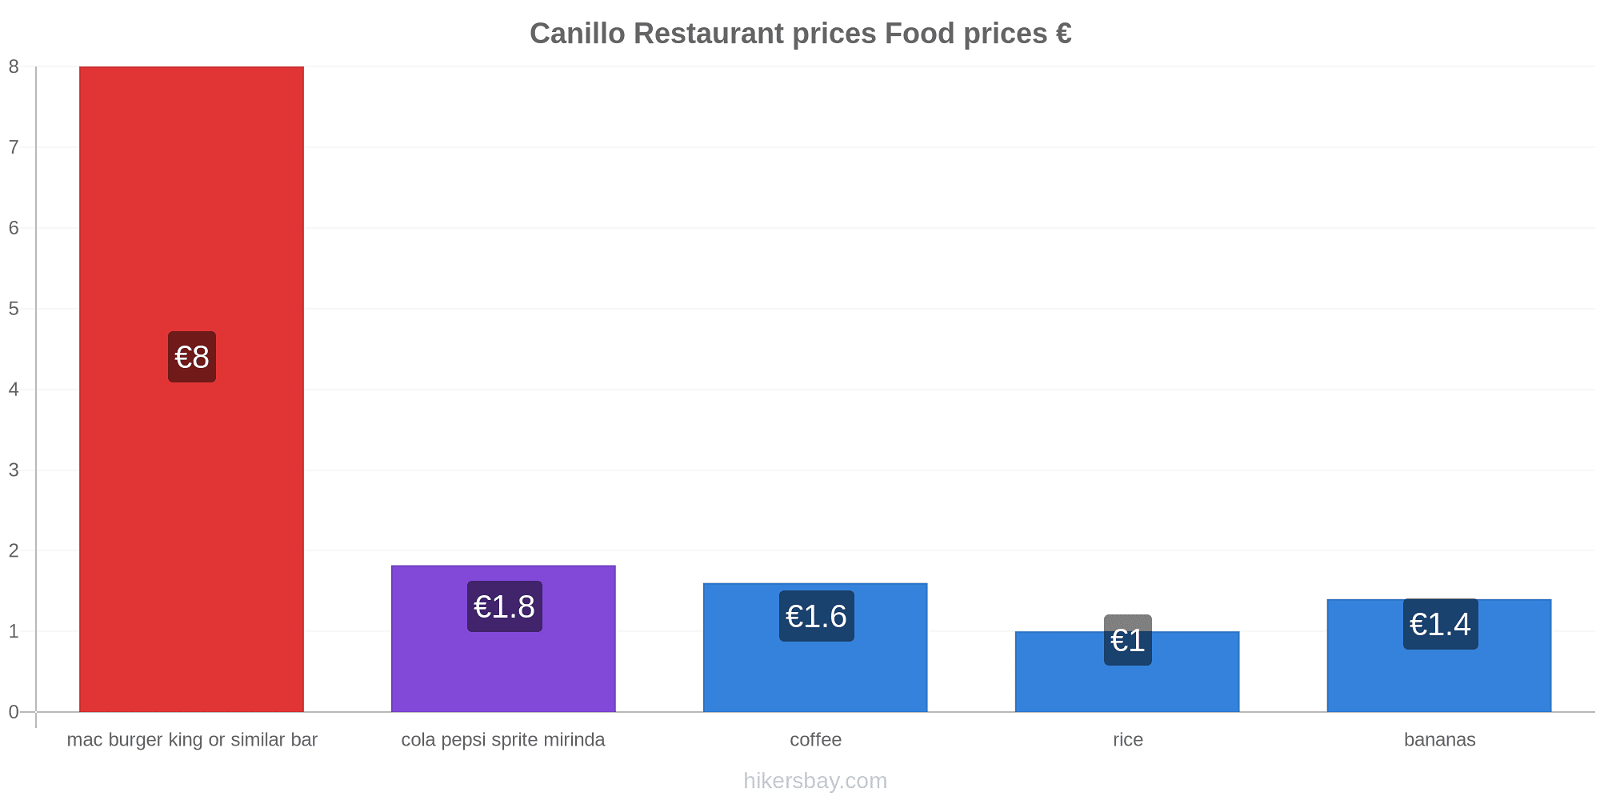 Canillo price changes hikersbay.com